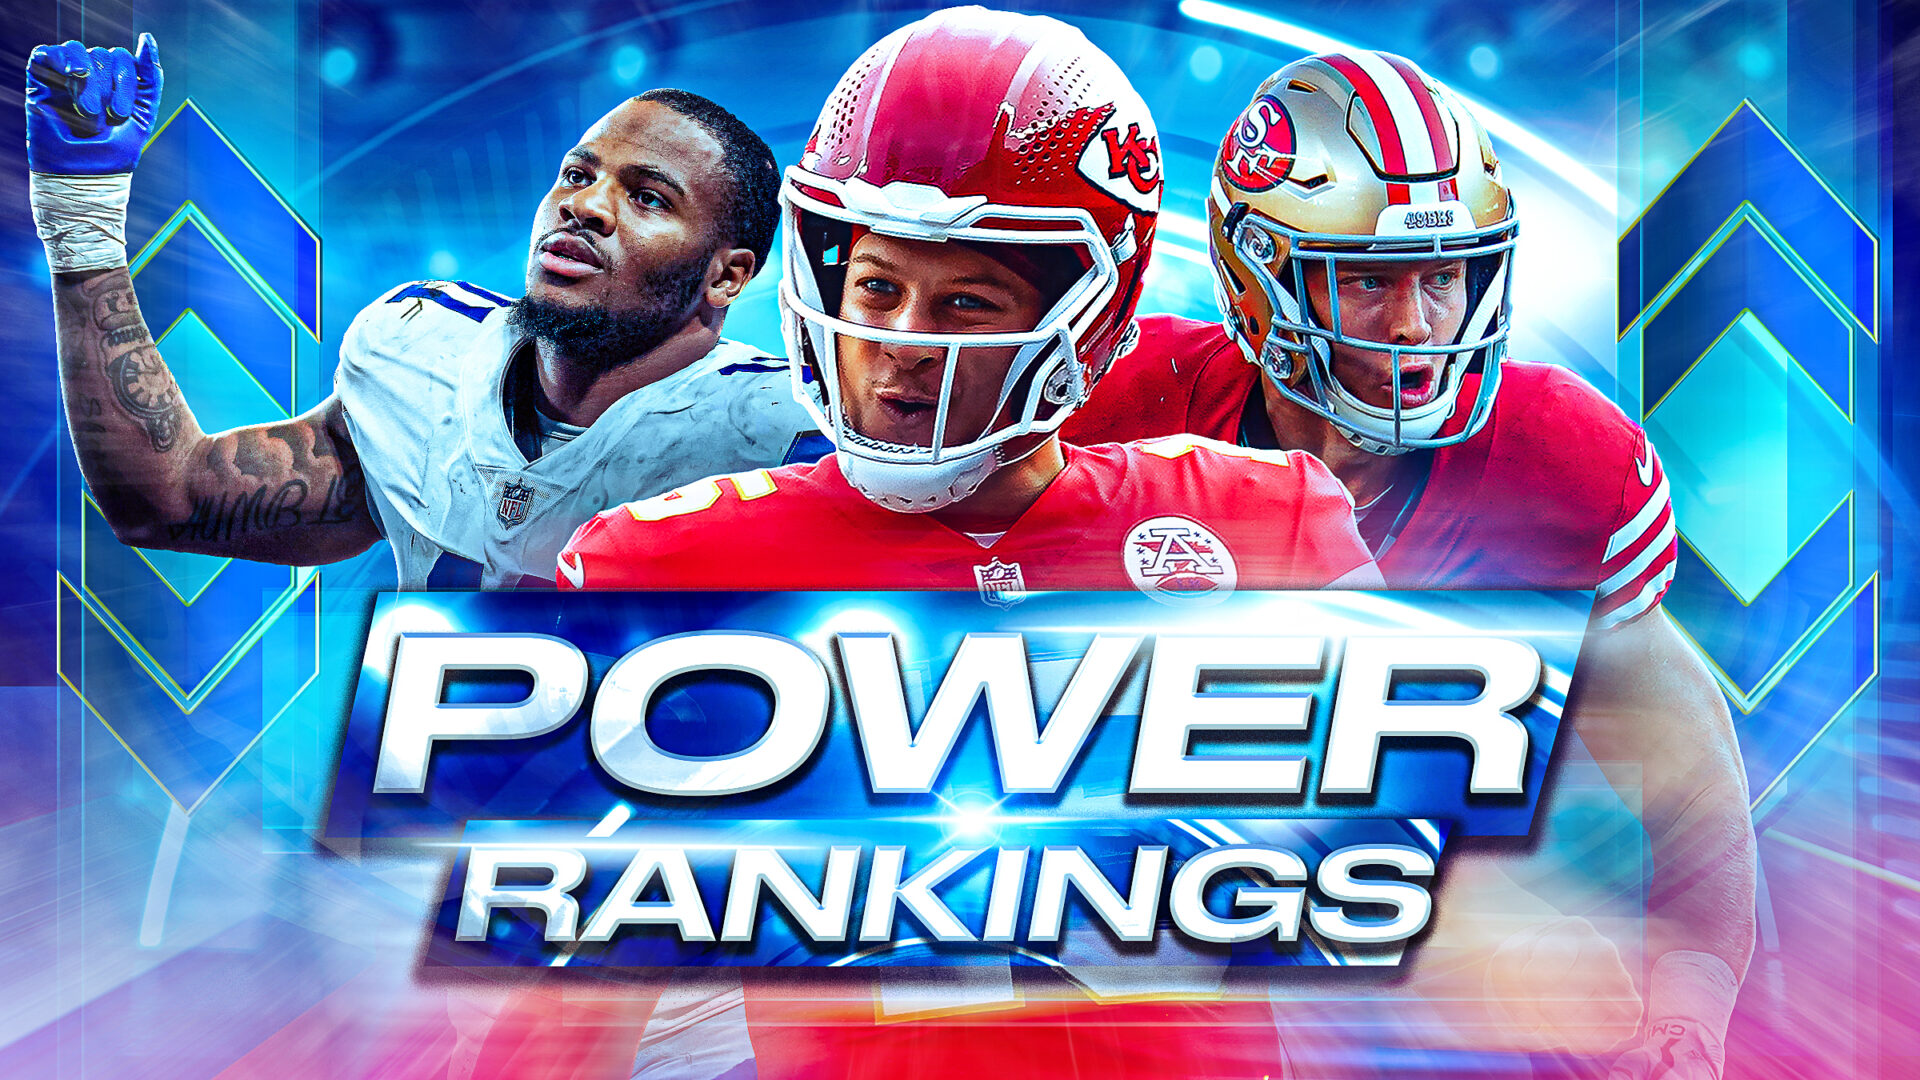 NFL Divisional Playoffs: Power Rankings for Top 4 Teams